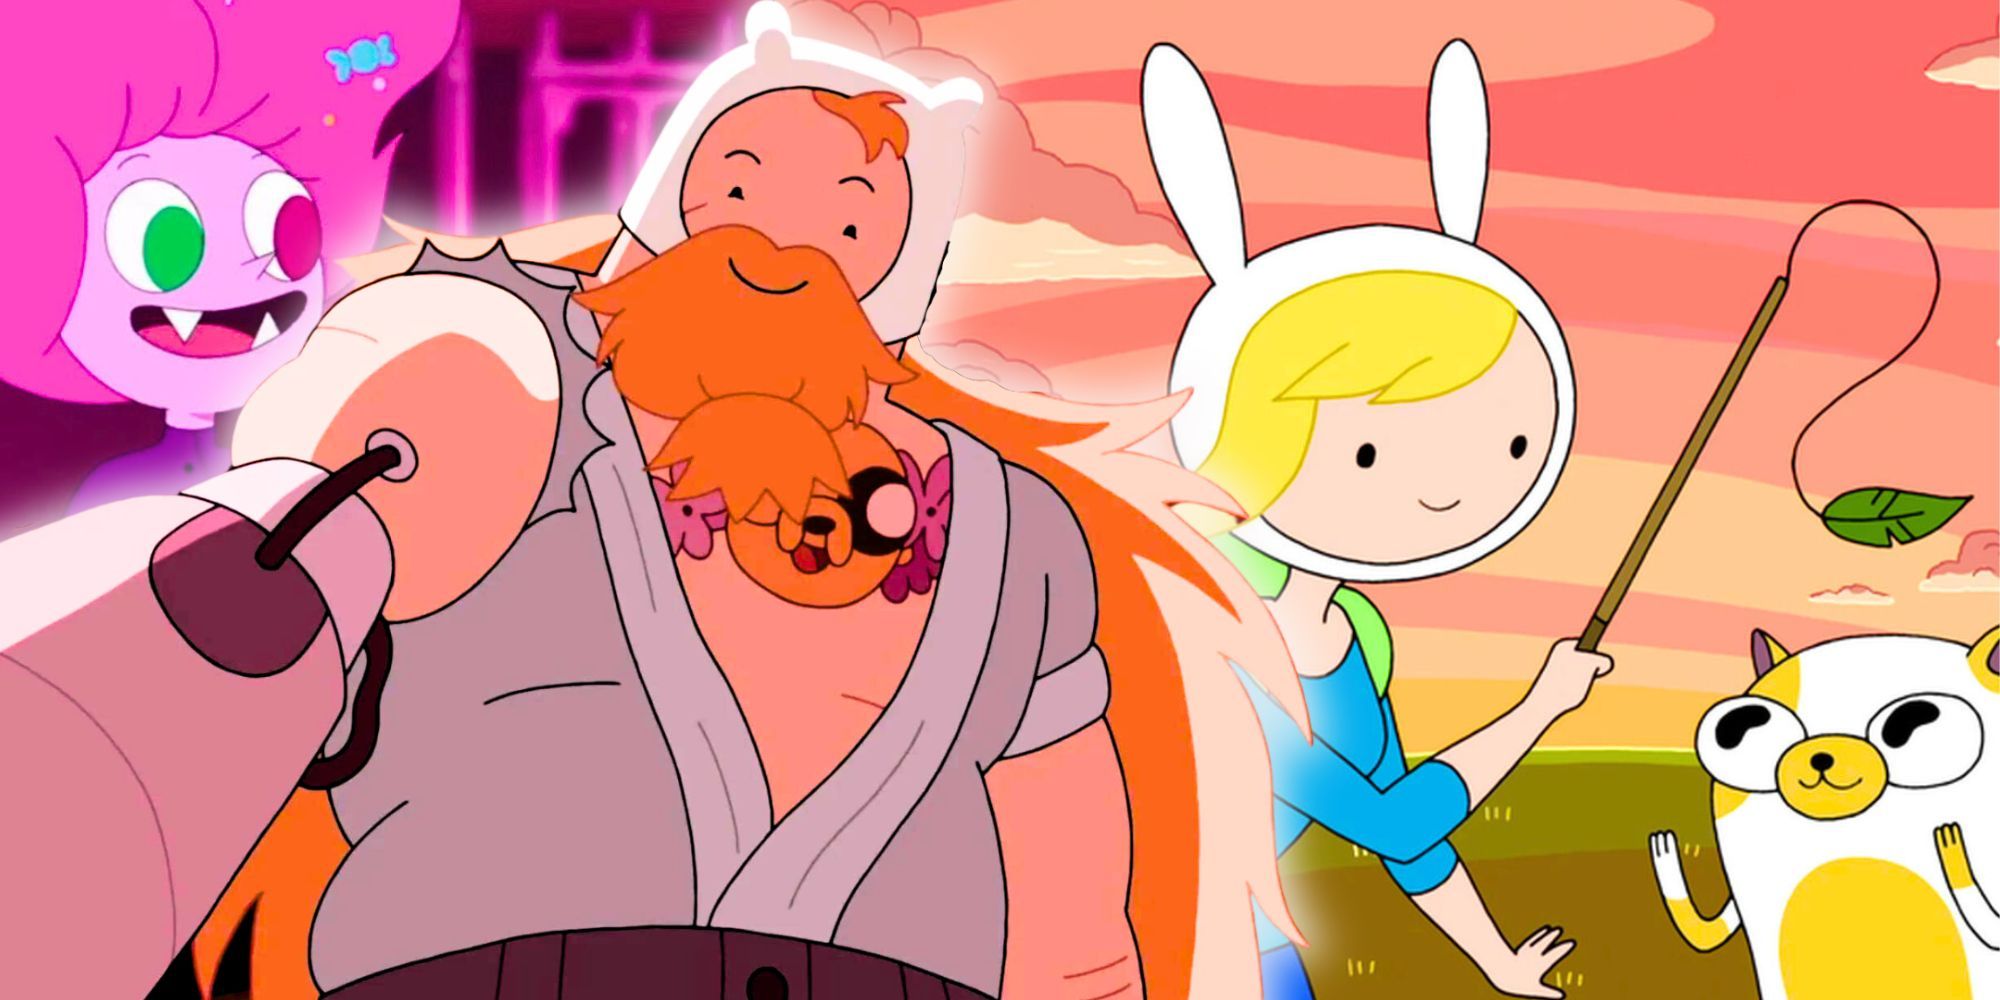 Finn the Human in Fionna and Cake Adventure Time spinoff